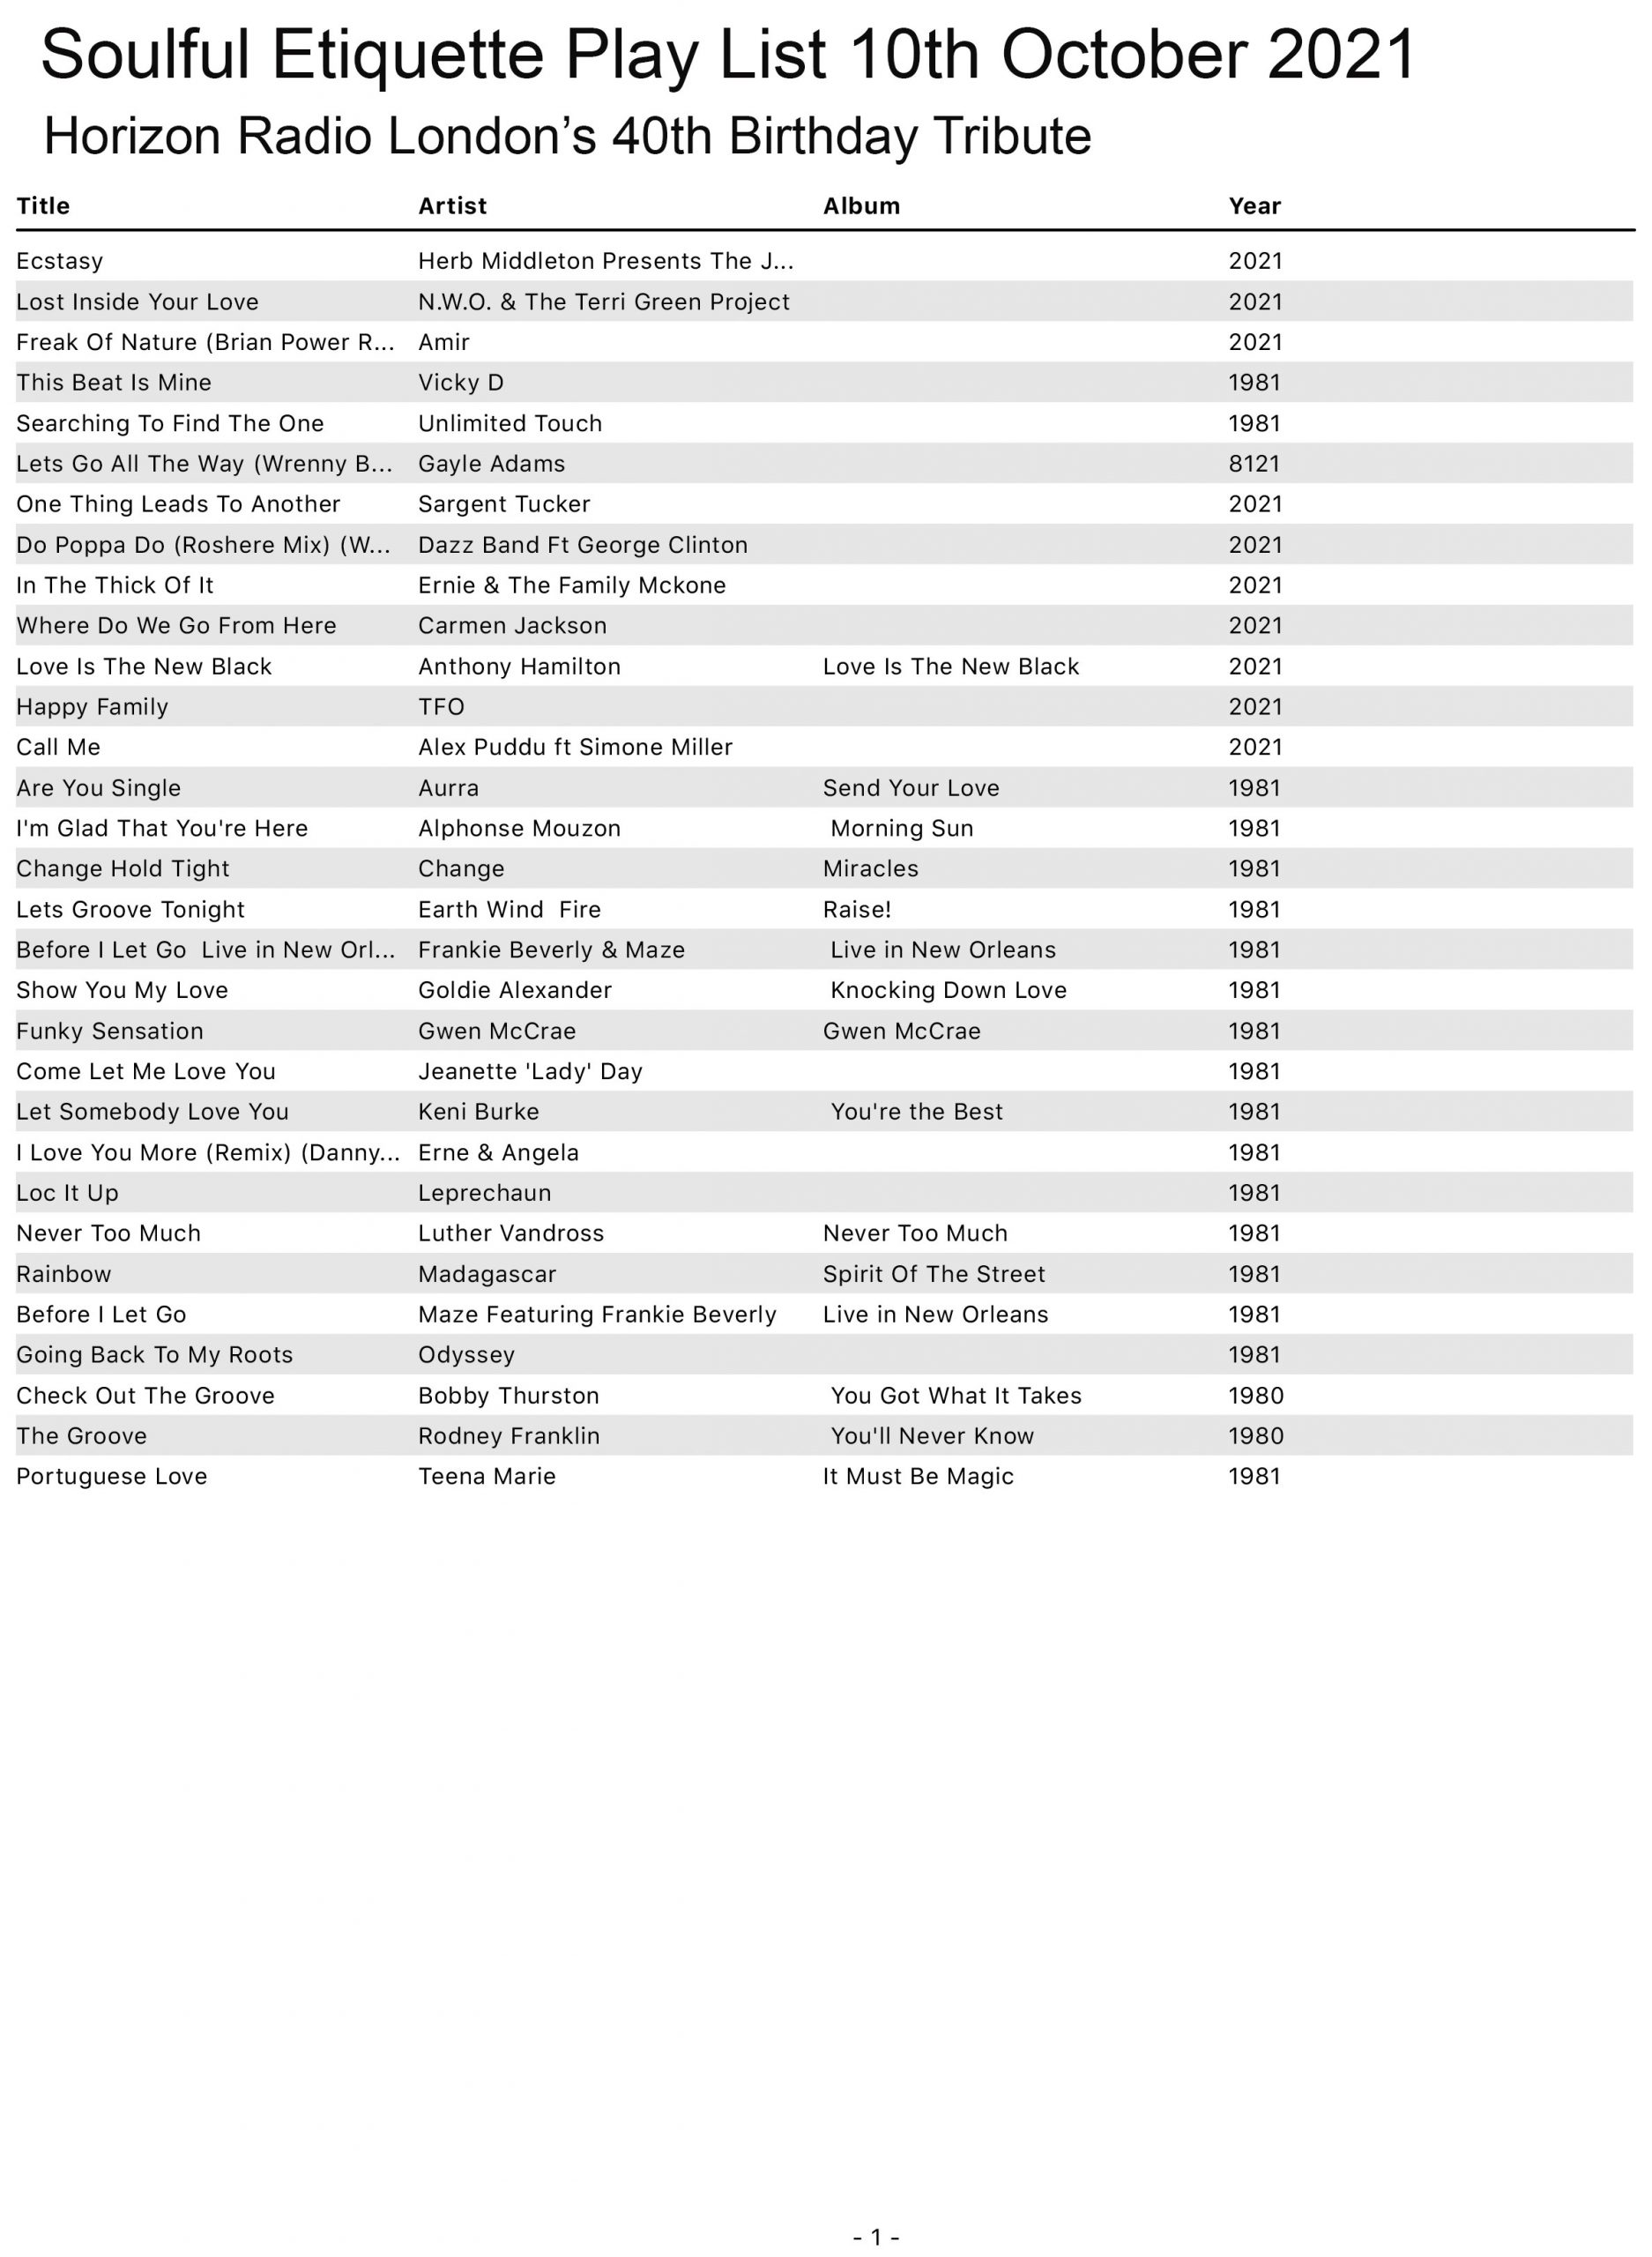 Play List For The Soulful Etiquette Soul Radio Show October 10th 2021